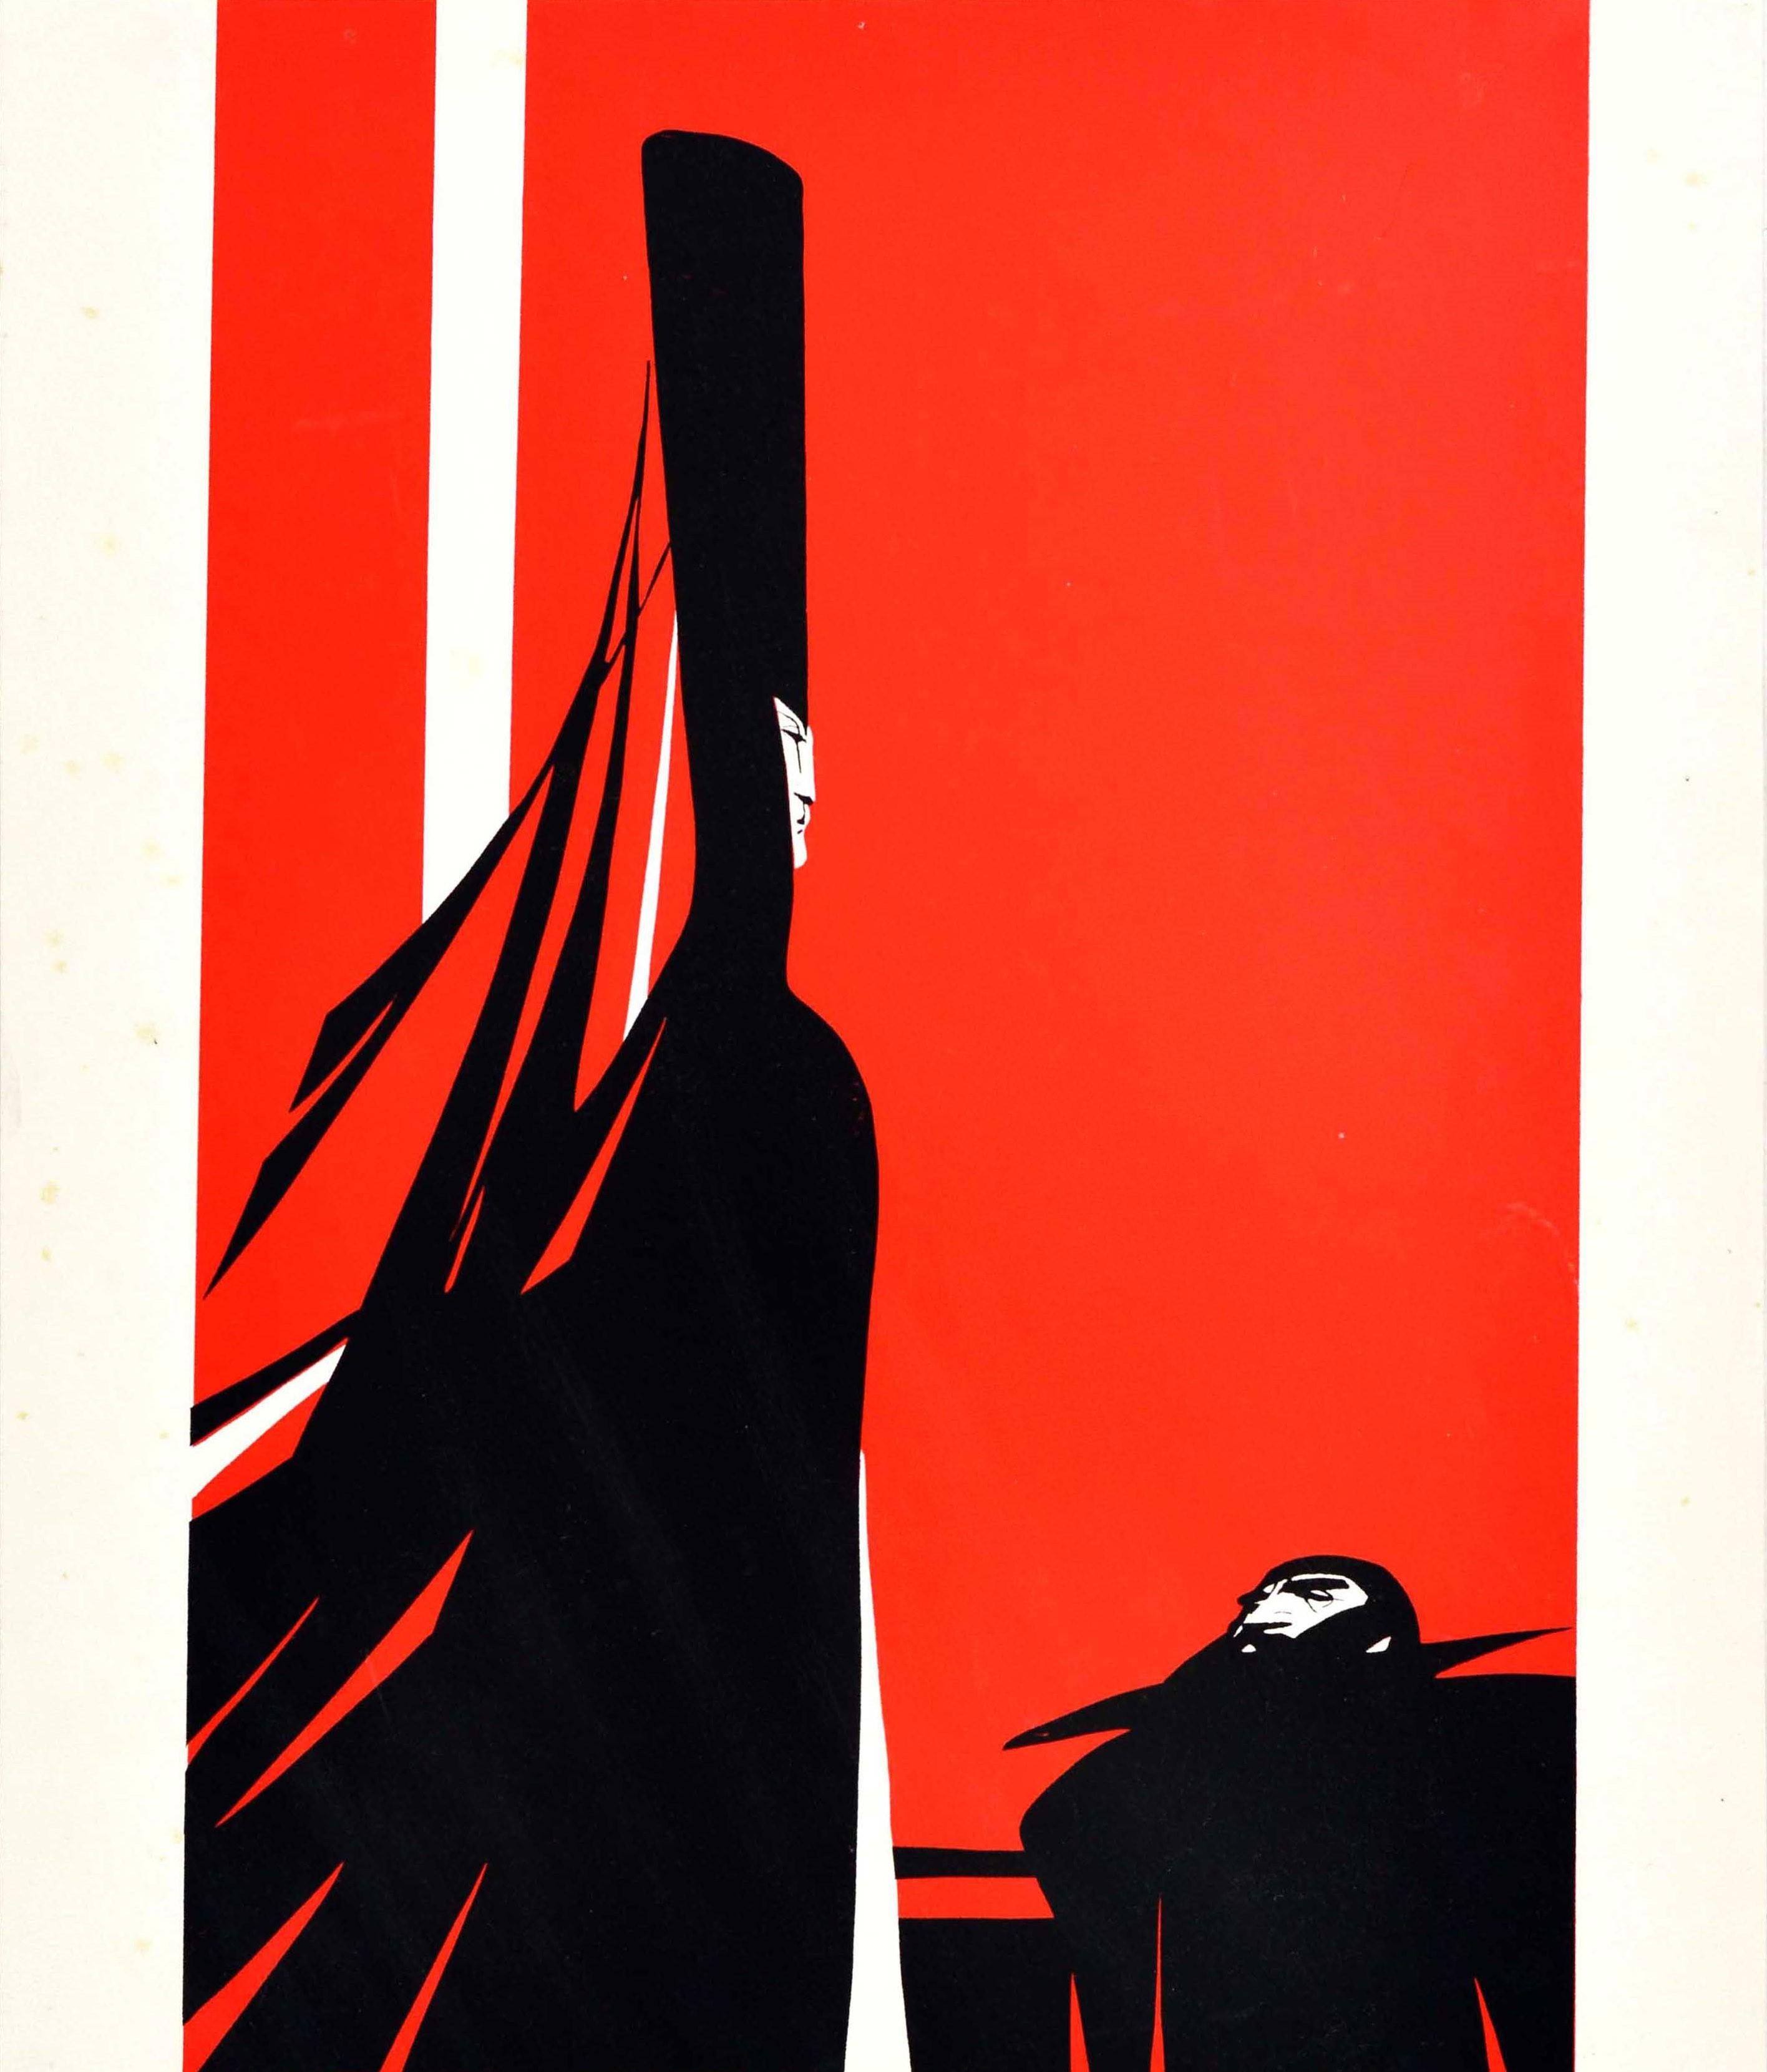 Original vintage advertising poster for the Bath Festival 24 May - 9 June 1985 36th International Festival of Music and The Arts featuring a stunning design depicting two people in black against a red background, the event title and information